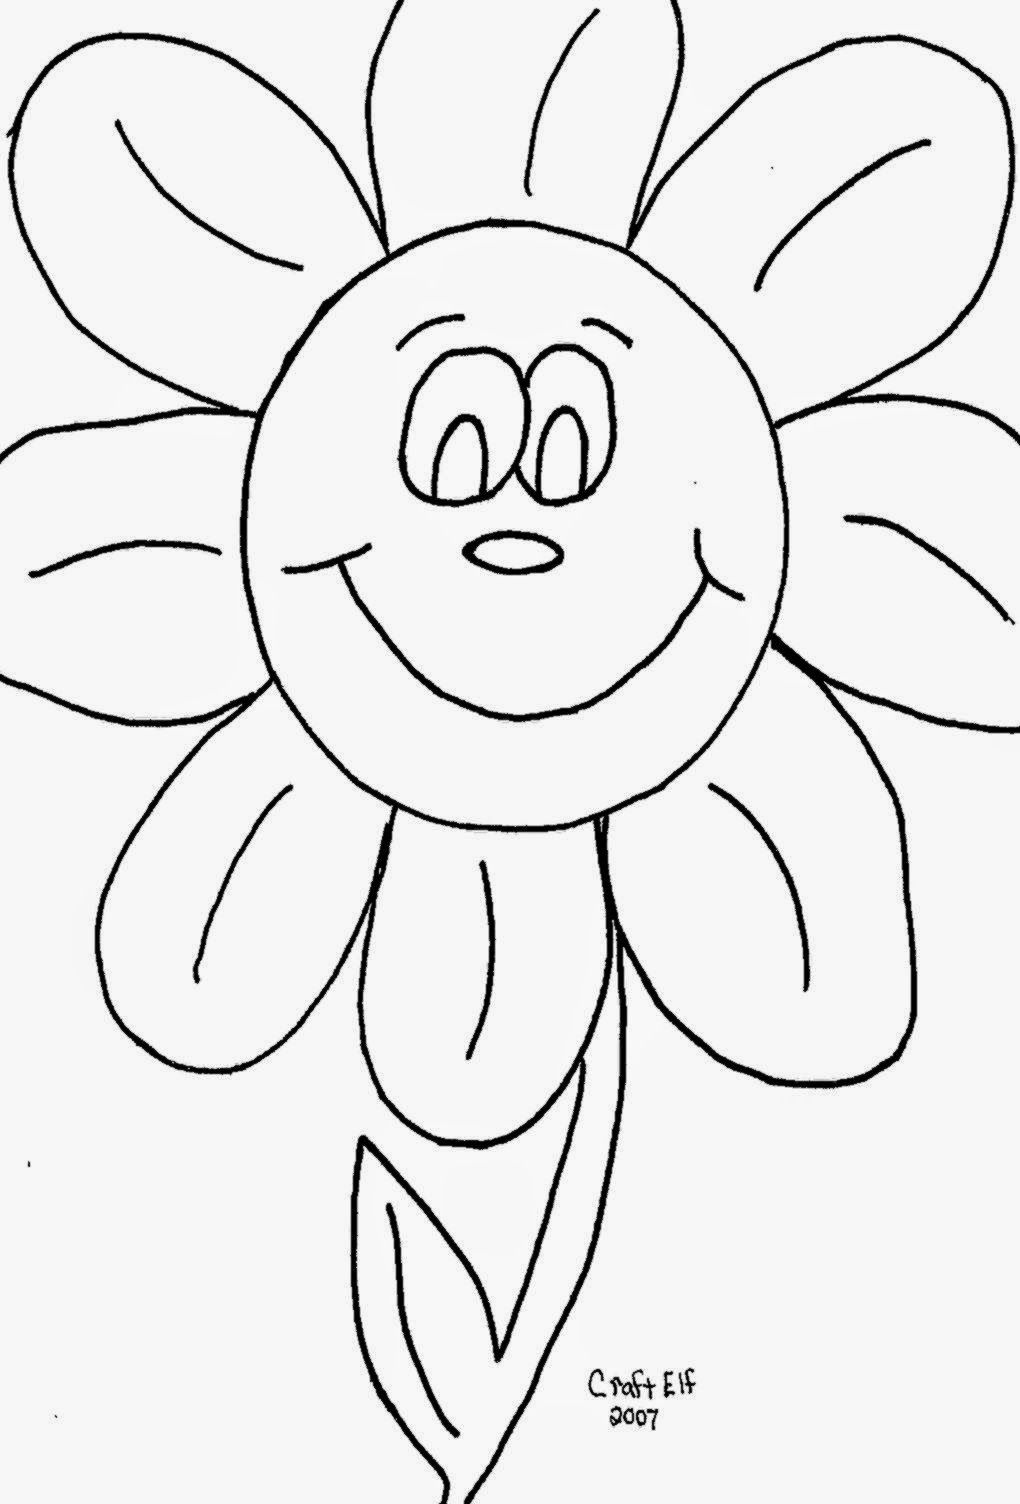 Free printable color worksheets for preschool and kindergarten preschooâ kindergarten coloring pages kindergarten coloring sheets free printable coloring pages